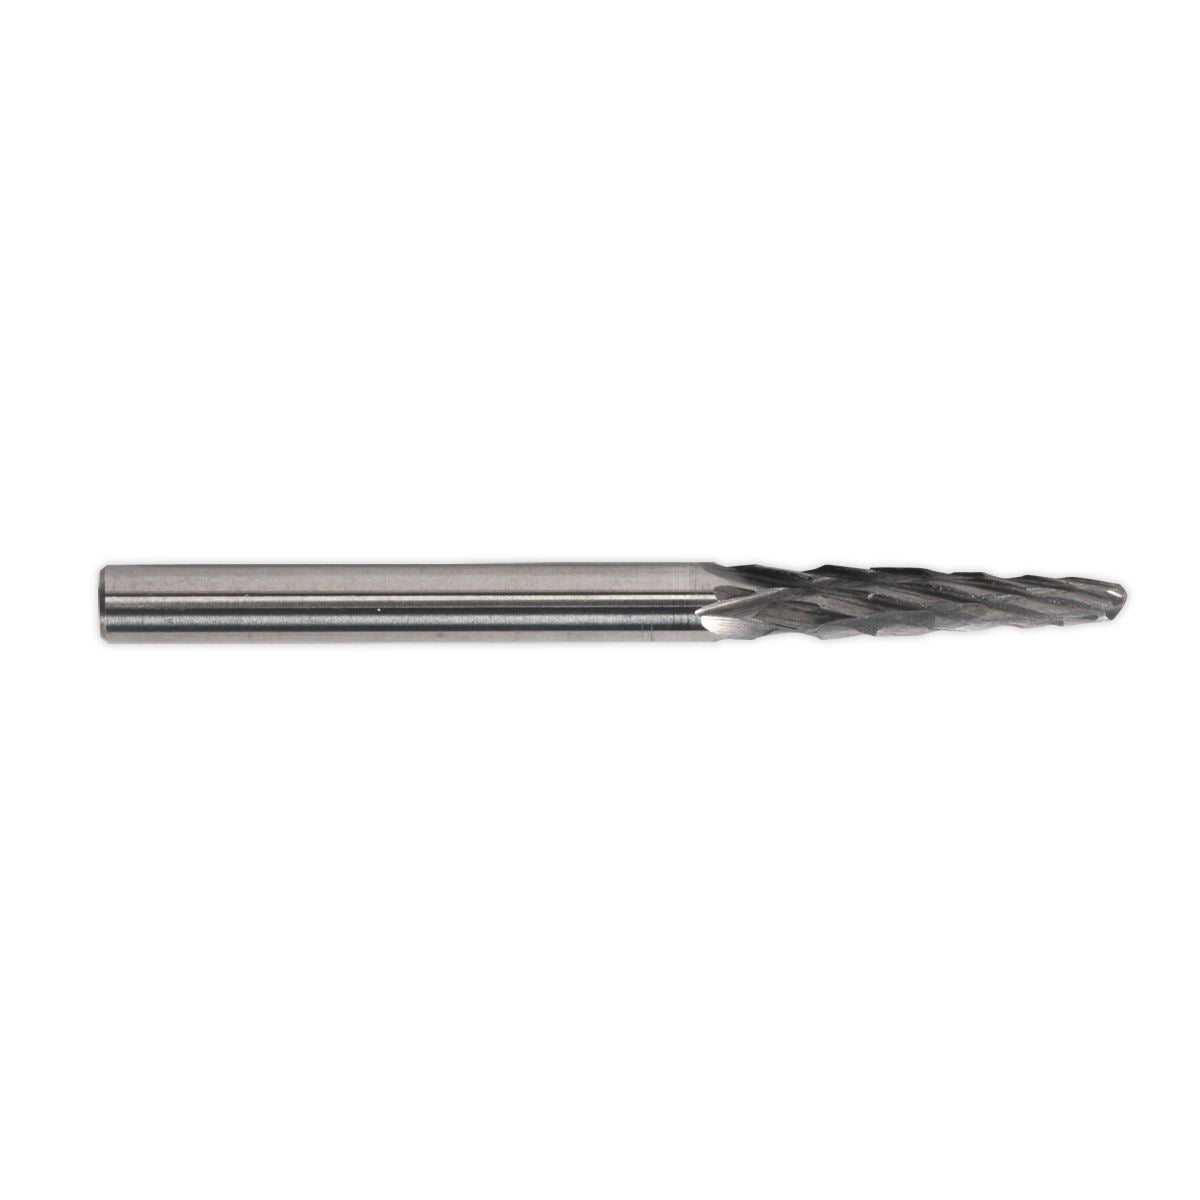 Sealey Micro Carbide Burr Ball Nose Taper 3mm Pack of 3